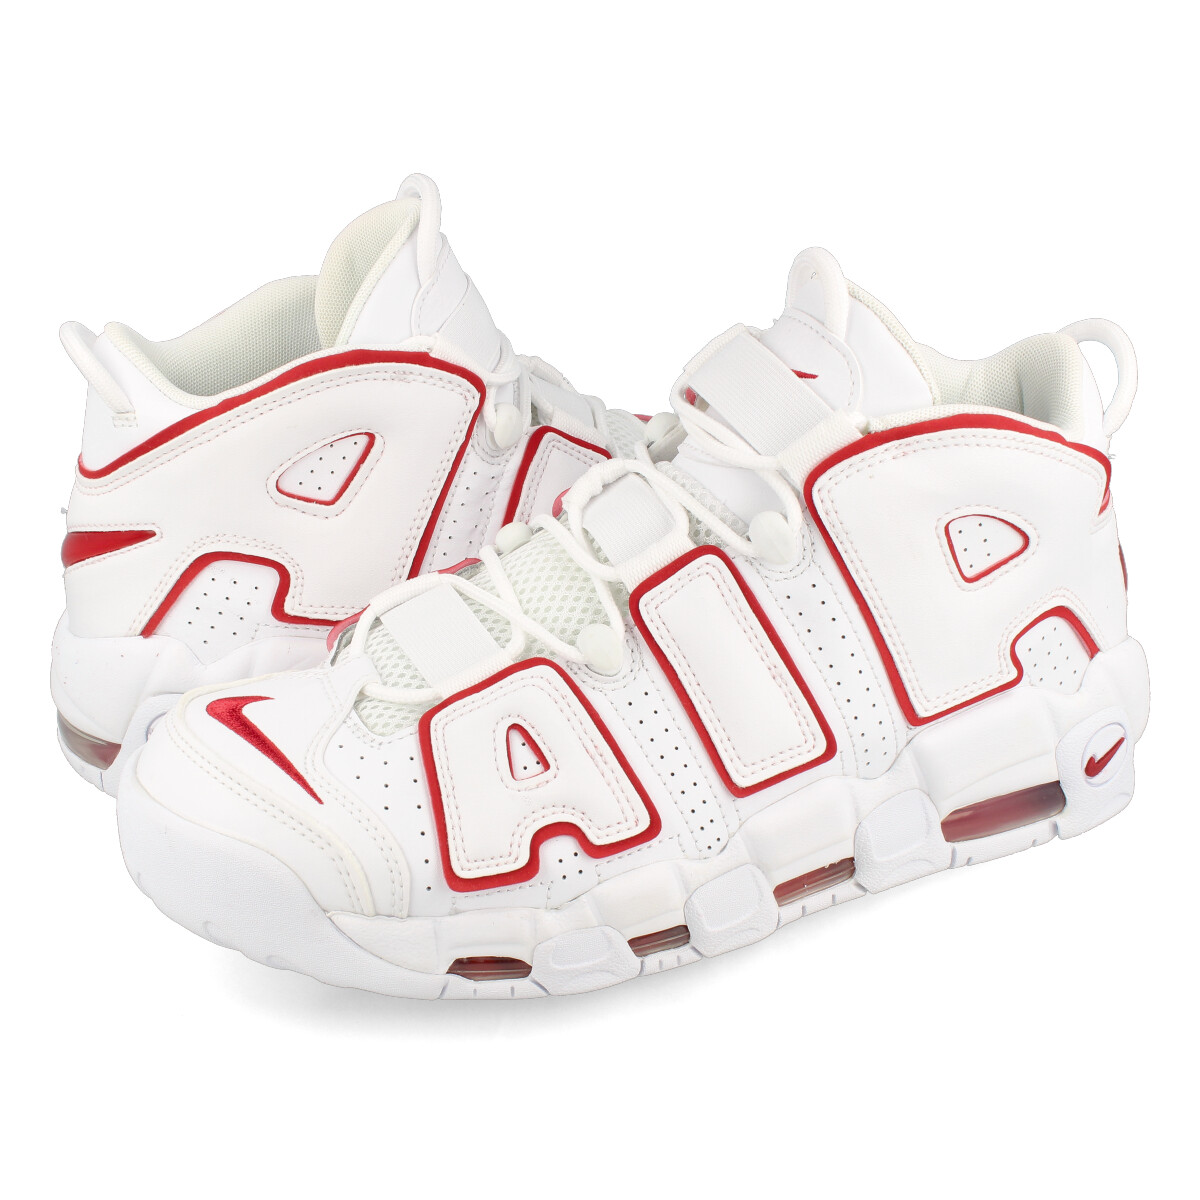 NIKE AIR MORE UPTEMPO 96 ナイキ モア アップ テンポ 96 WHITE/VARSITY RED/WHITE  921948-102 | SELECT SHOP LOWTEX